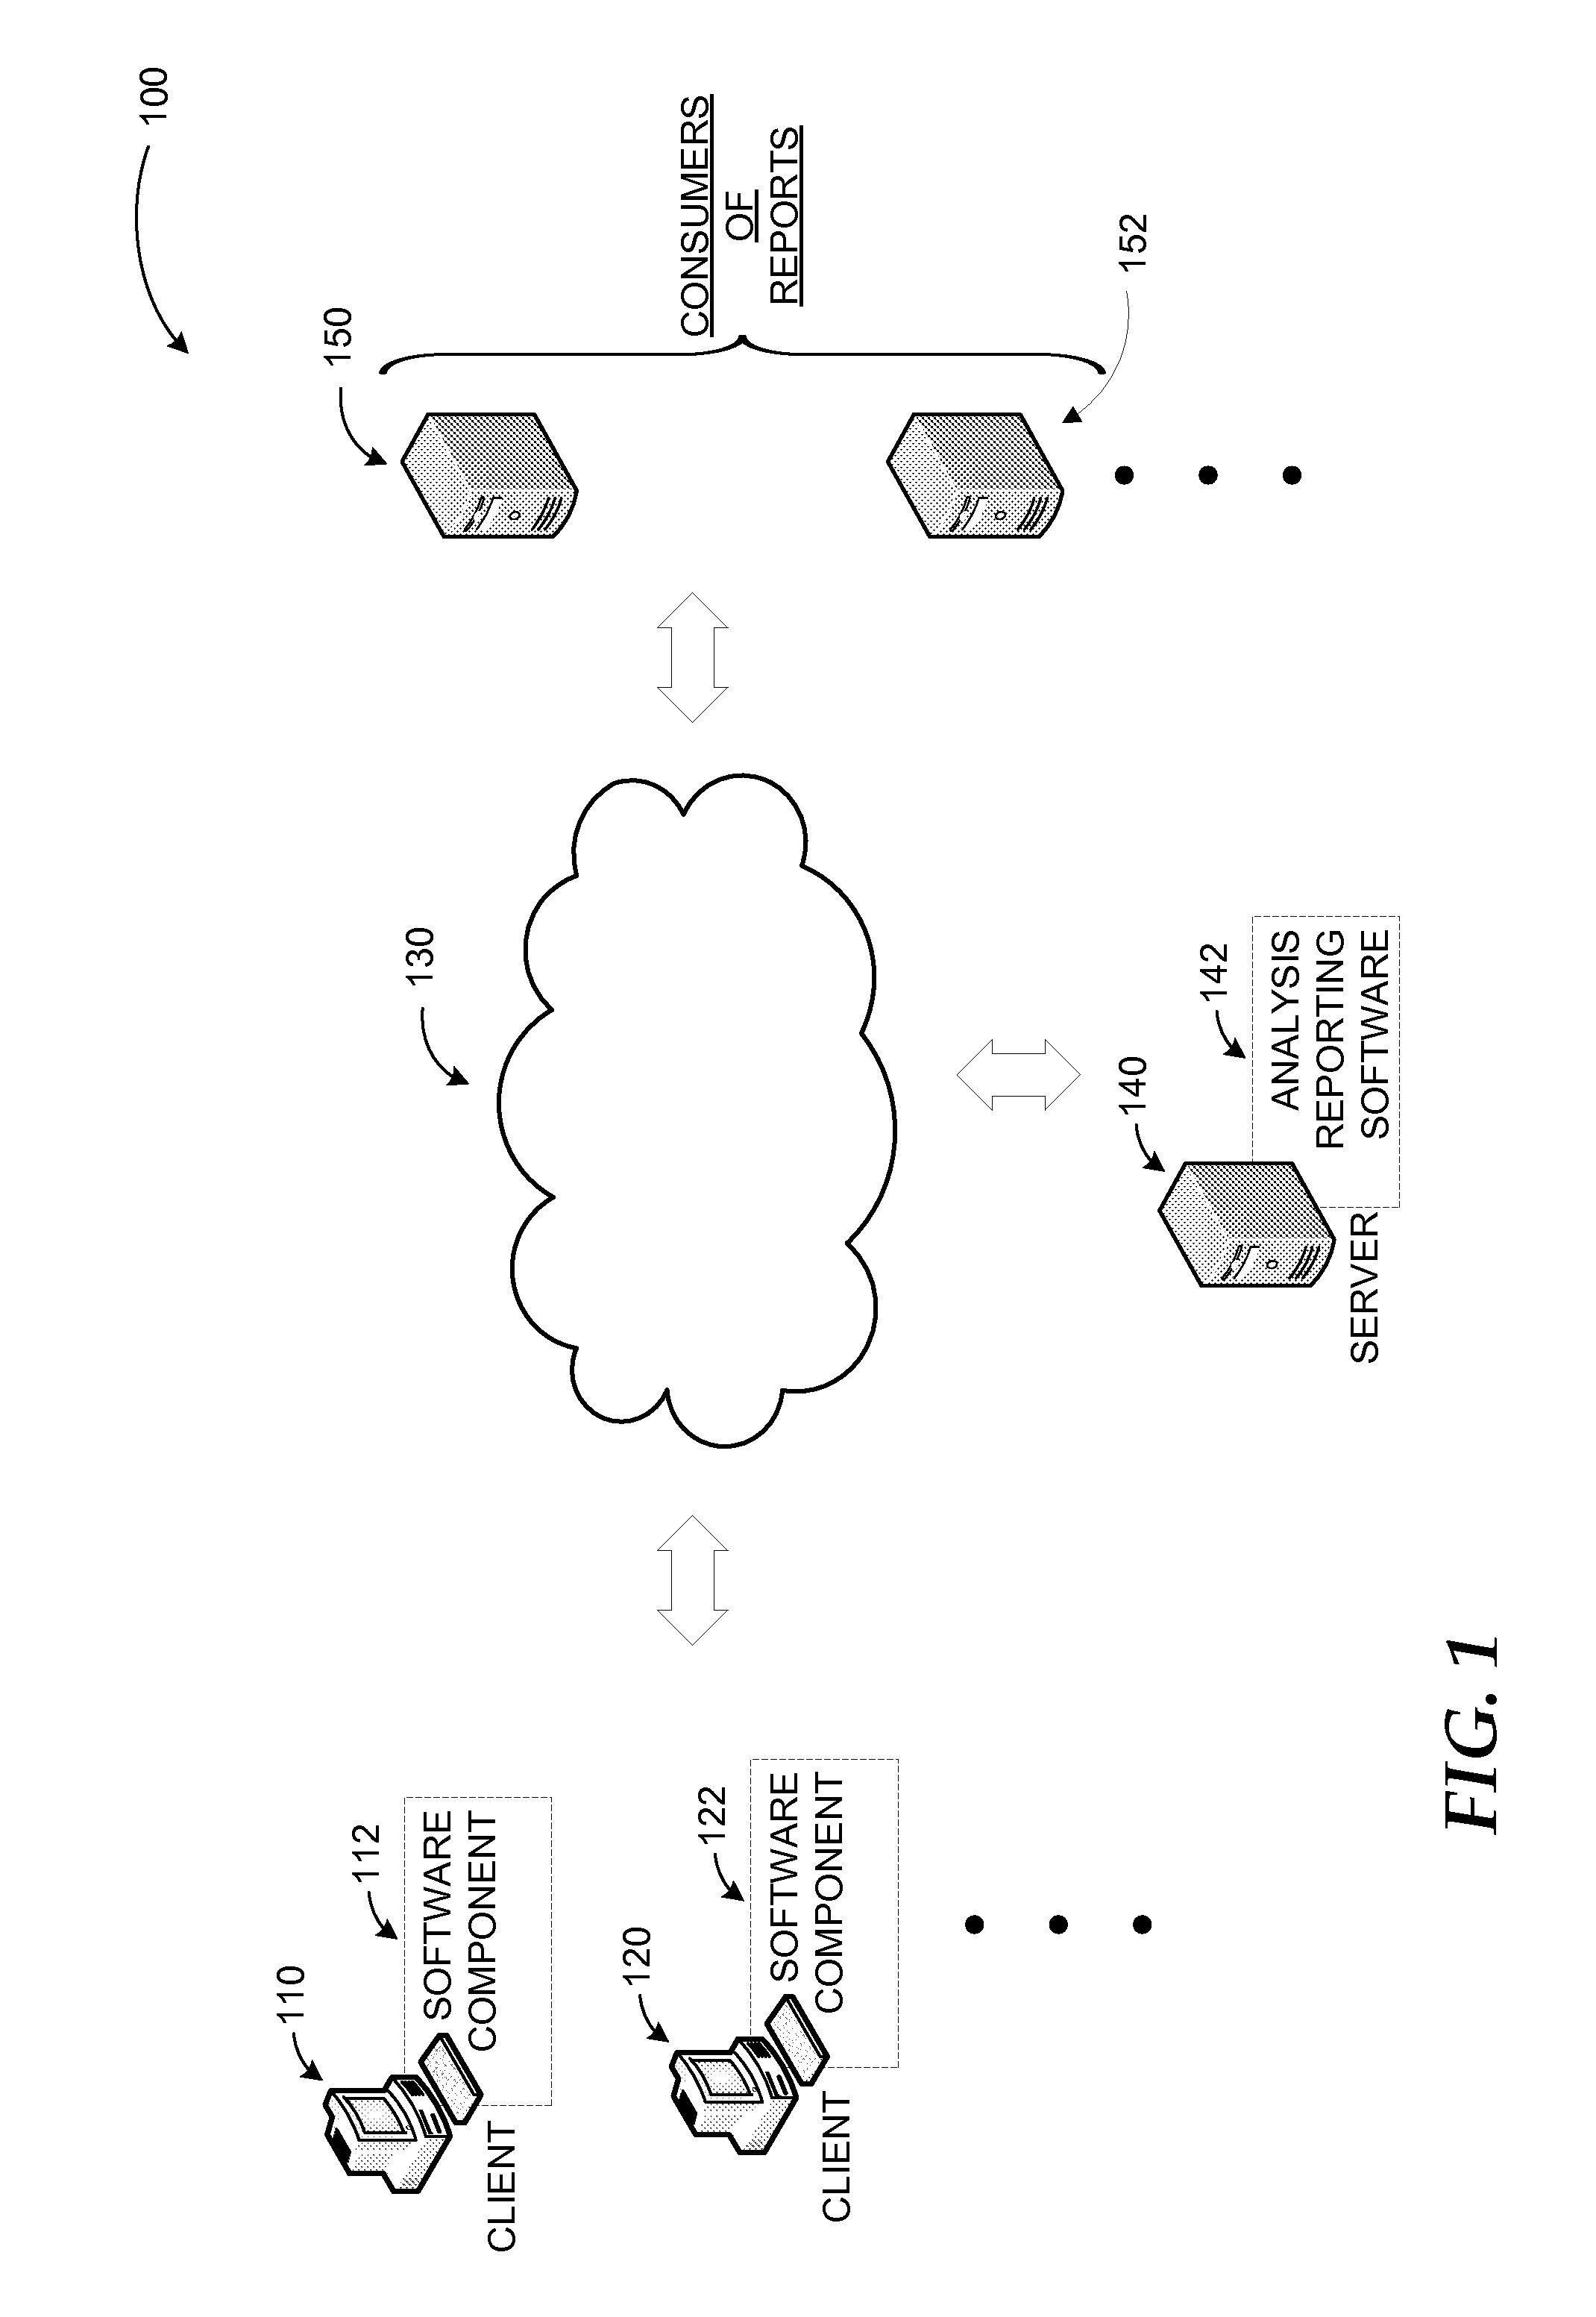 Providing lightweight multidimensional online data storage for web service usage reporting